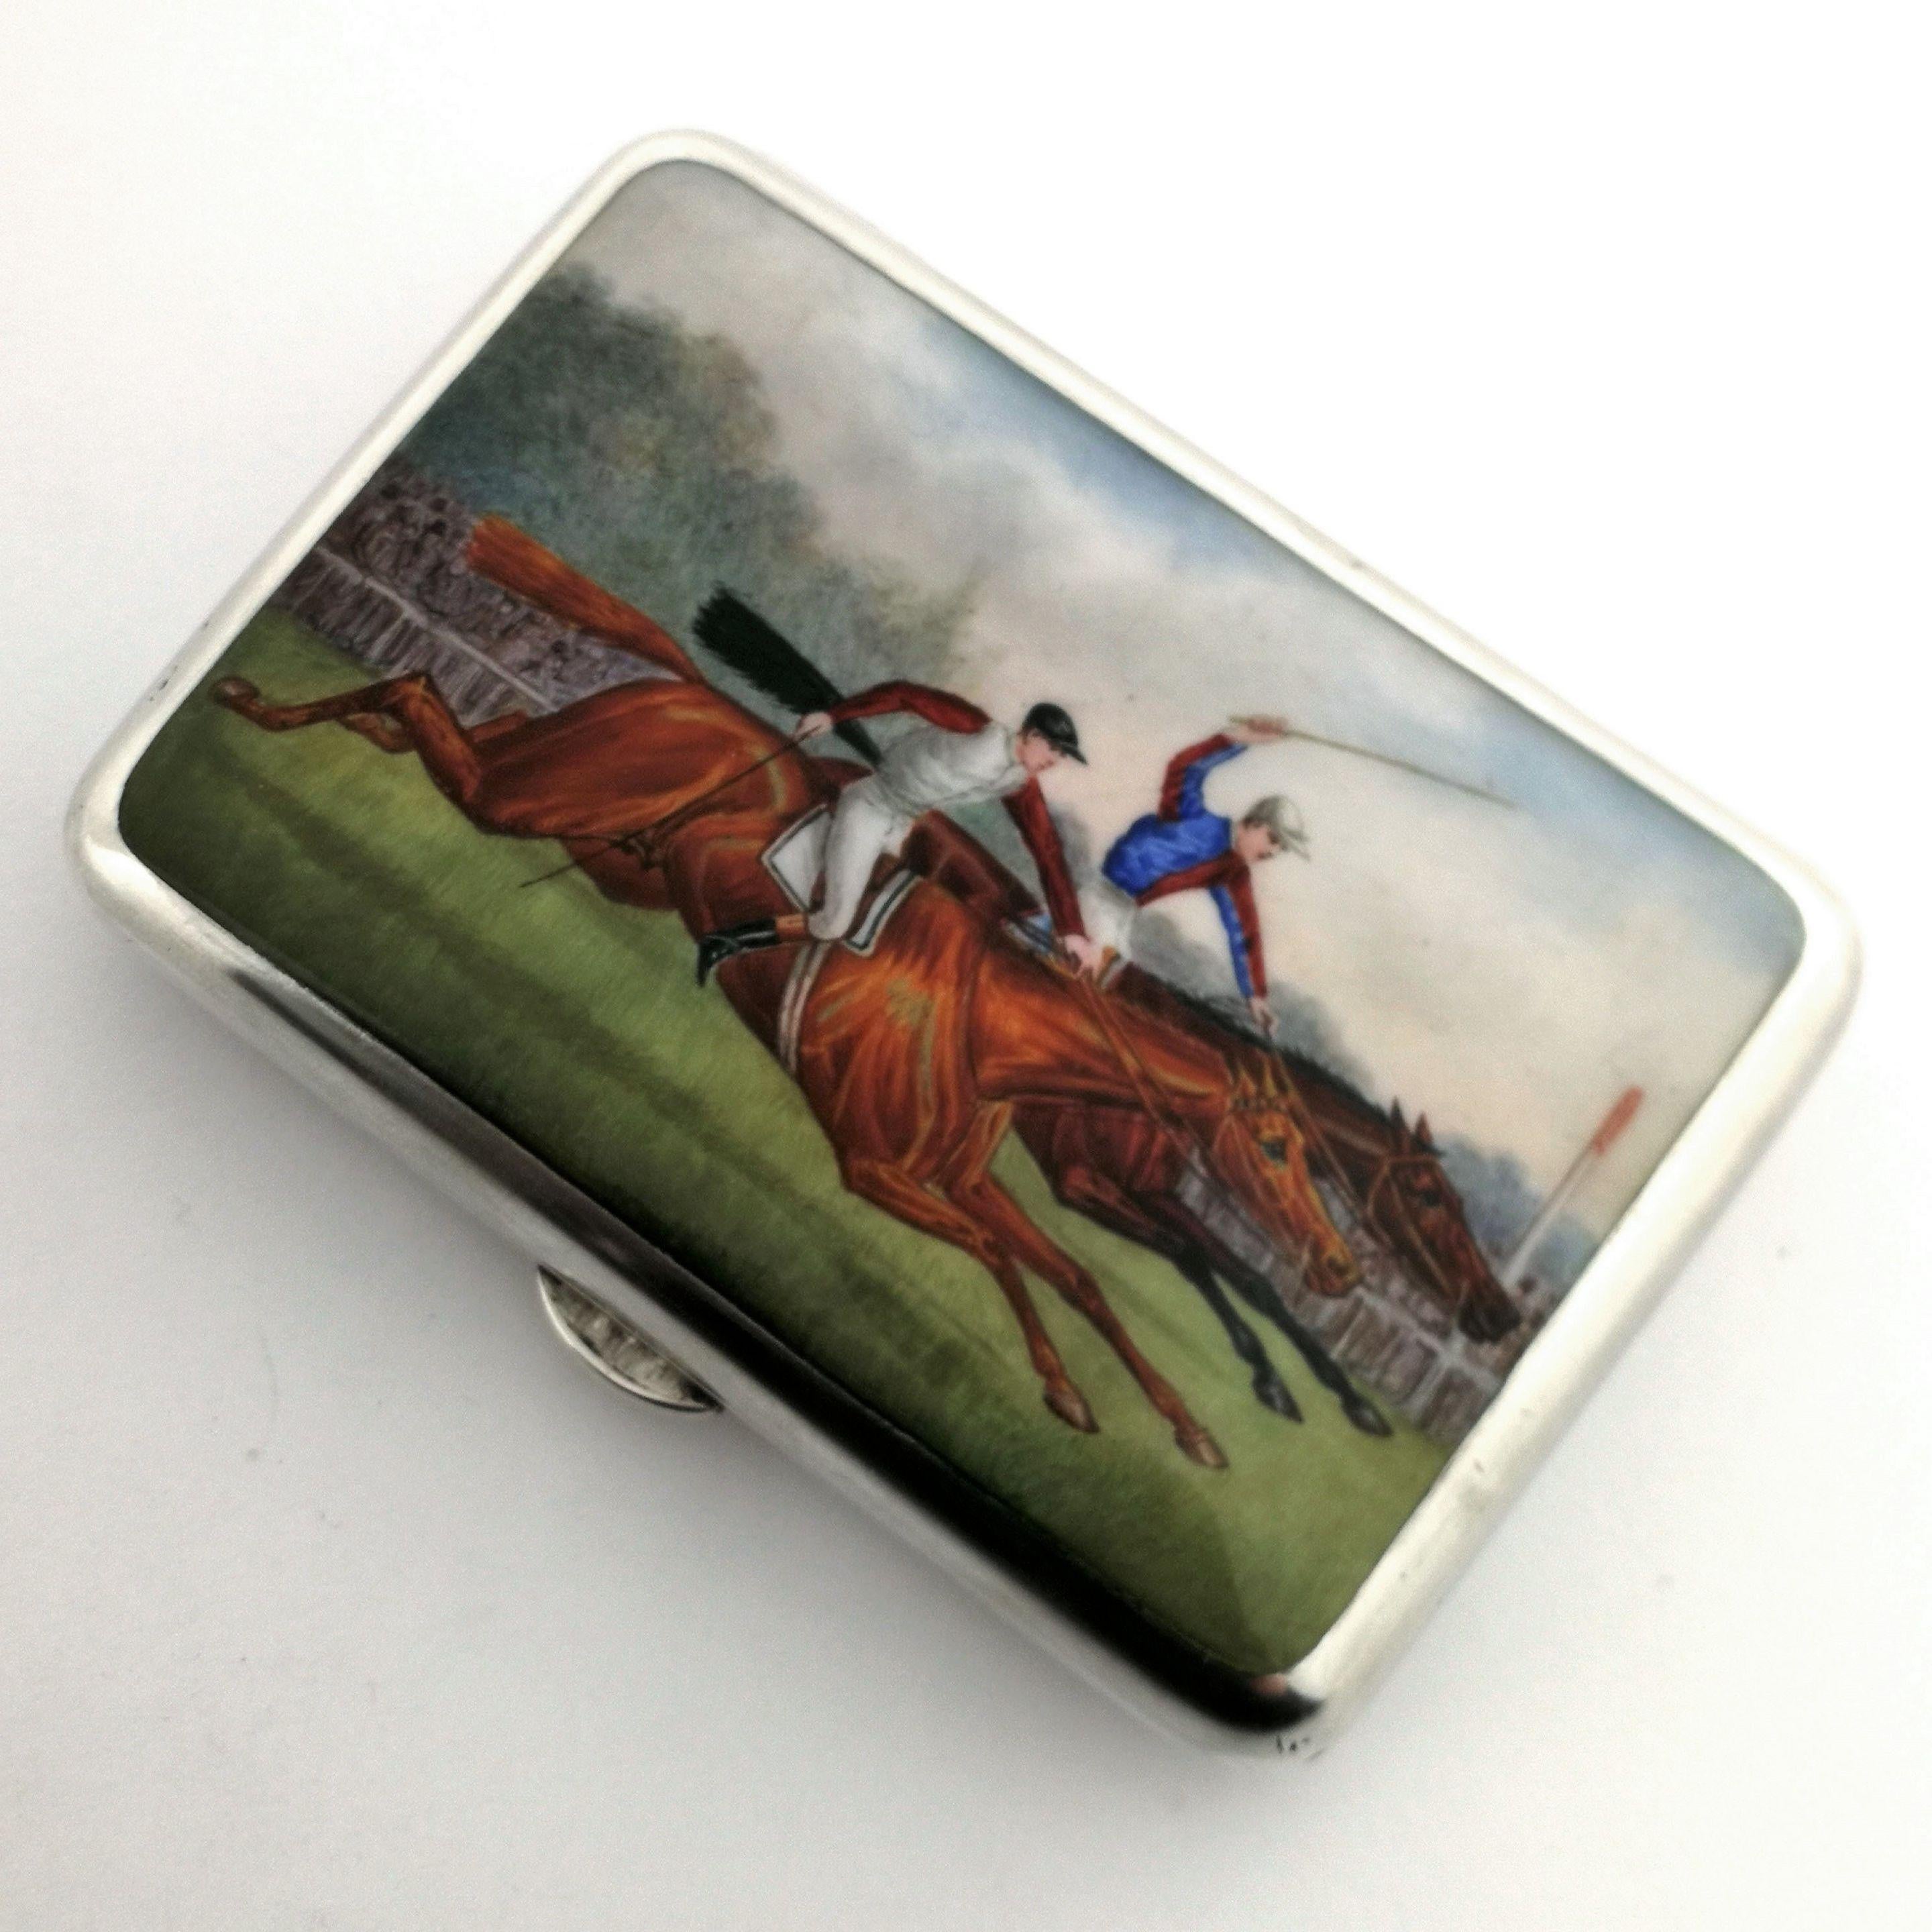 A gorgeous Antique Victorian sterling Silver and Enamel Cigarette Case. The cover of the case features a richly coloured enamel image of a pair of horses and jockeys racing down a grass track. The interior of the Case has a pair of engravings -